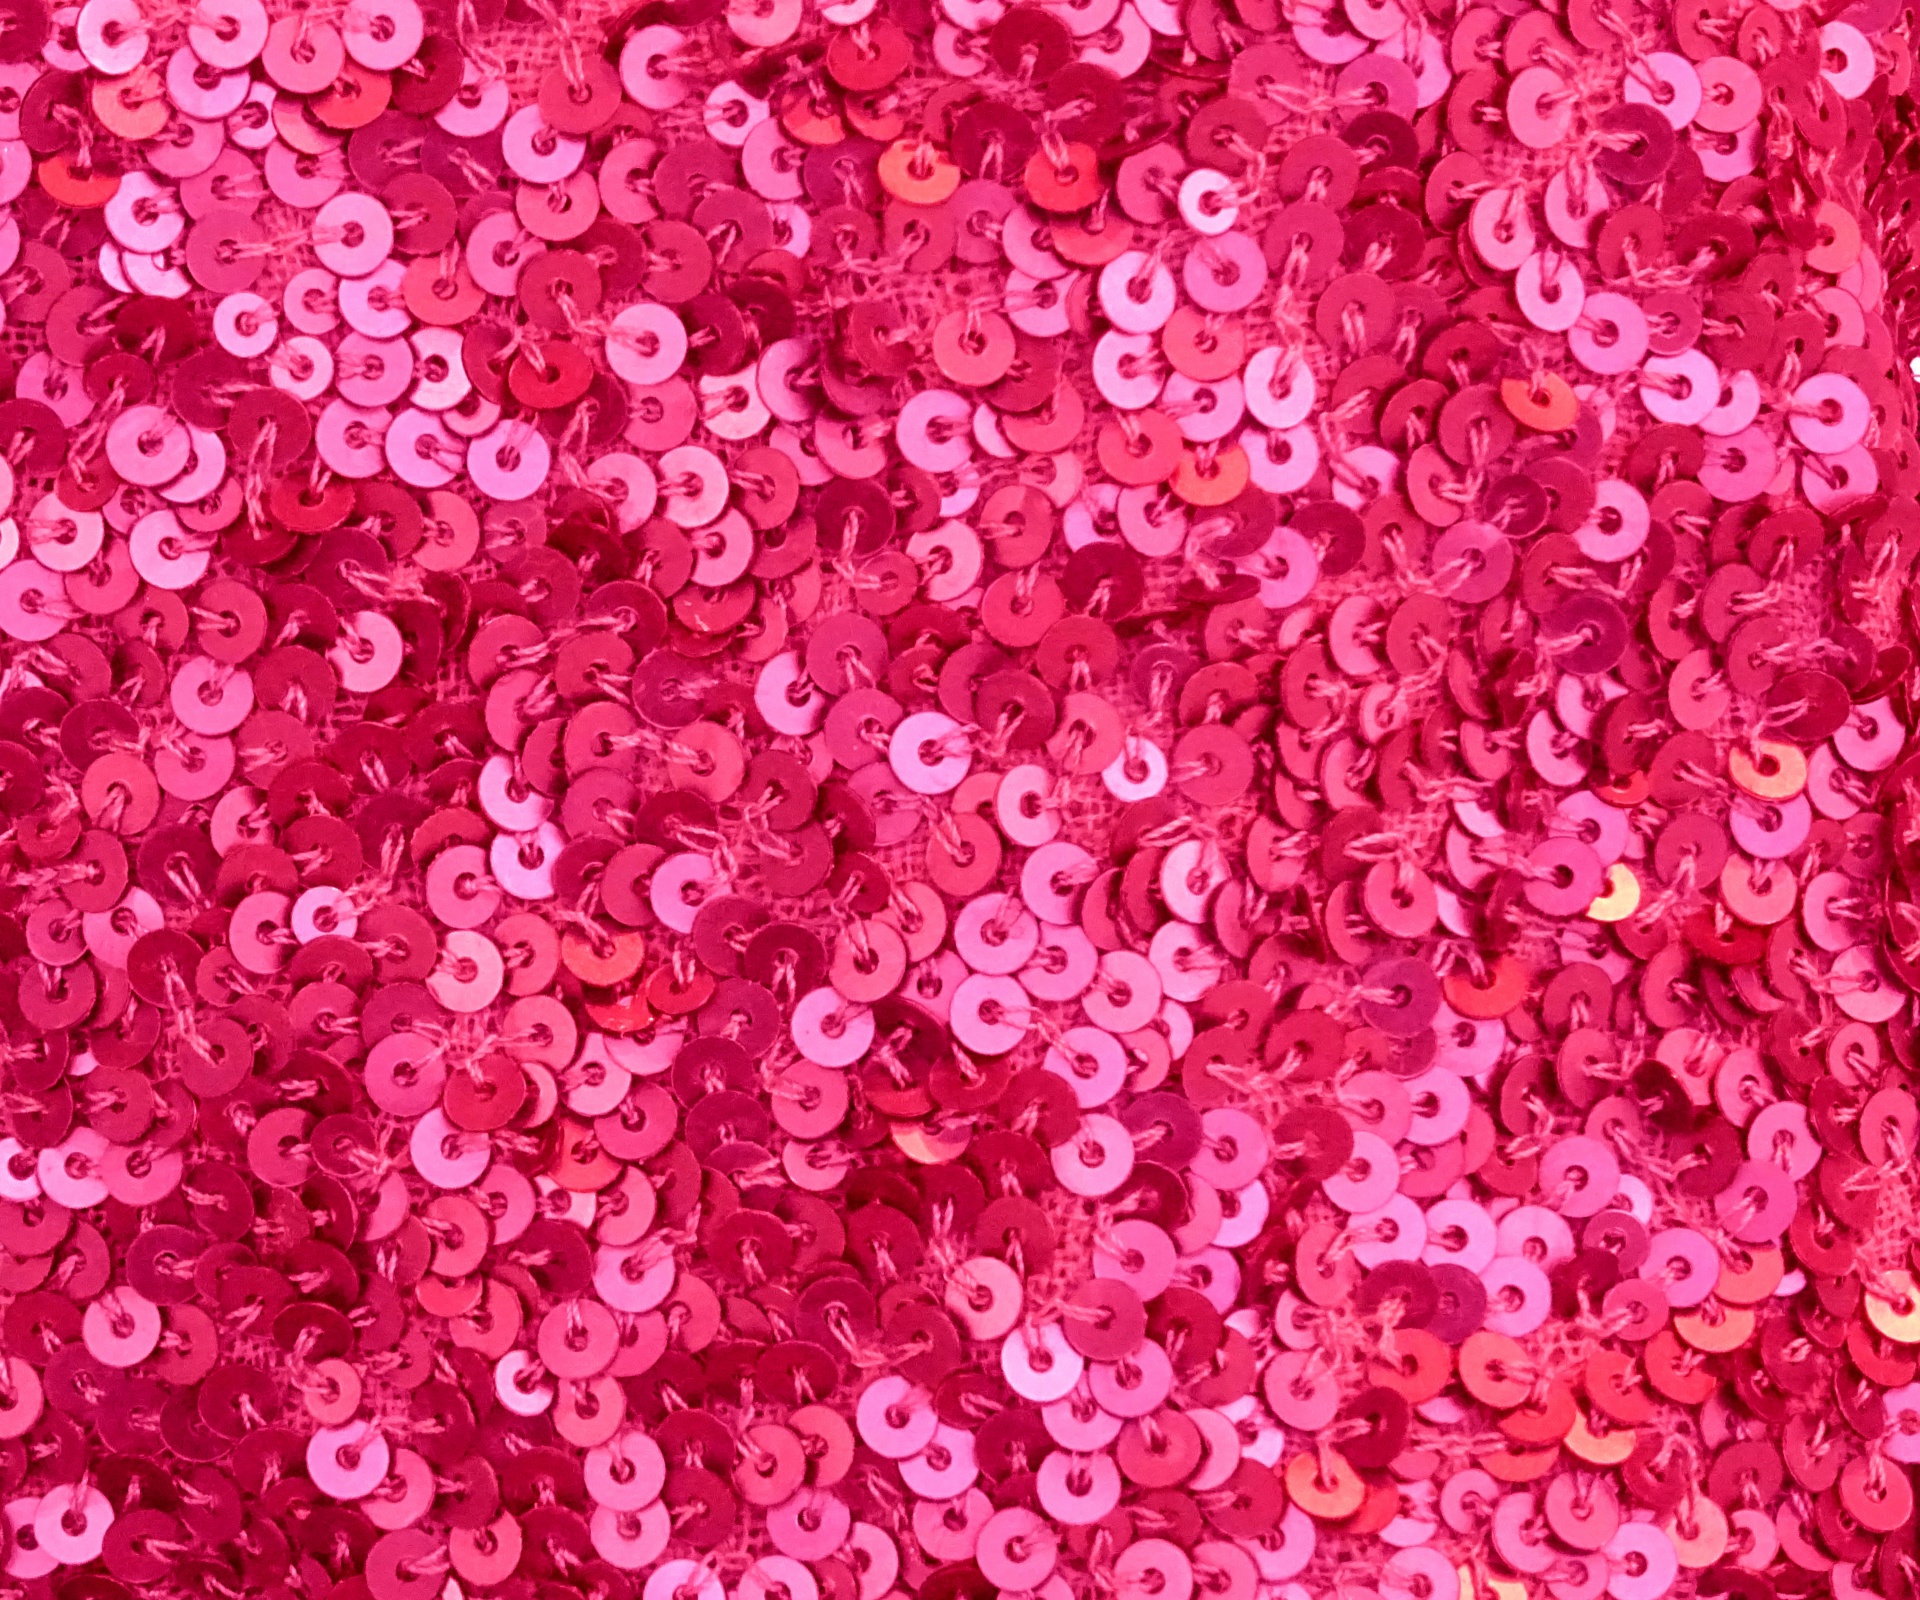 Pink Sequins Background Free Stock Photo Public Domain HD Wallpapers Download Free Images Wallpaper [wallpaper981.blogspot.com]